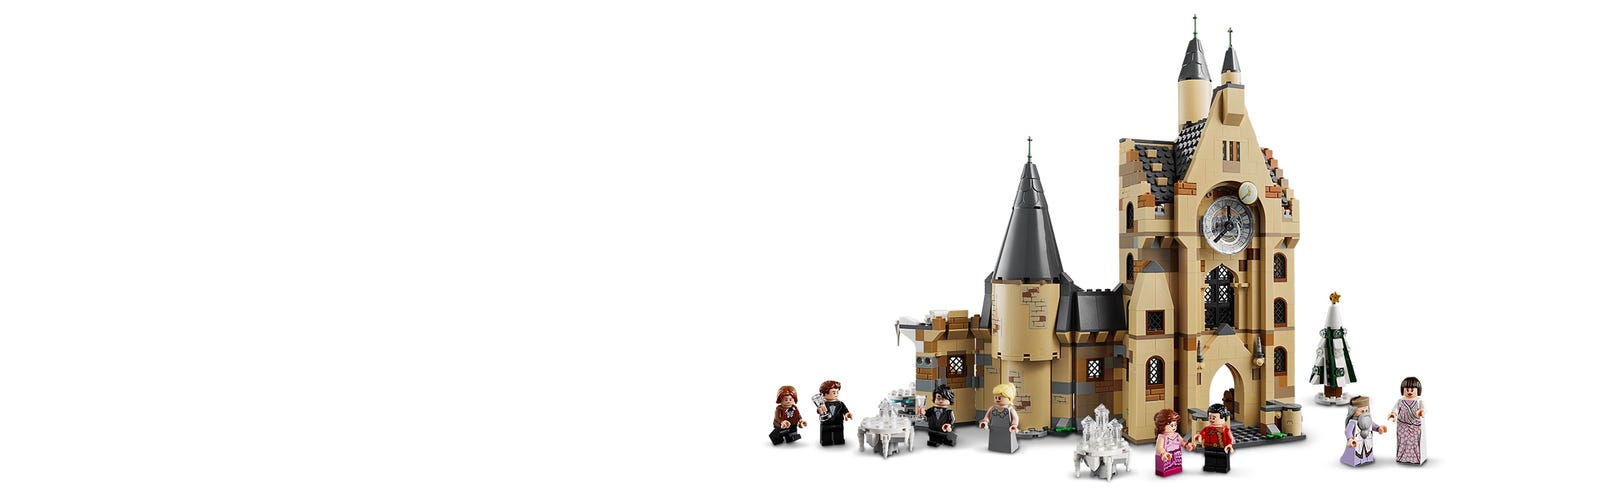 LEGO Harry Potter and The Goblet of Fire Hogwarts Castle Clock